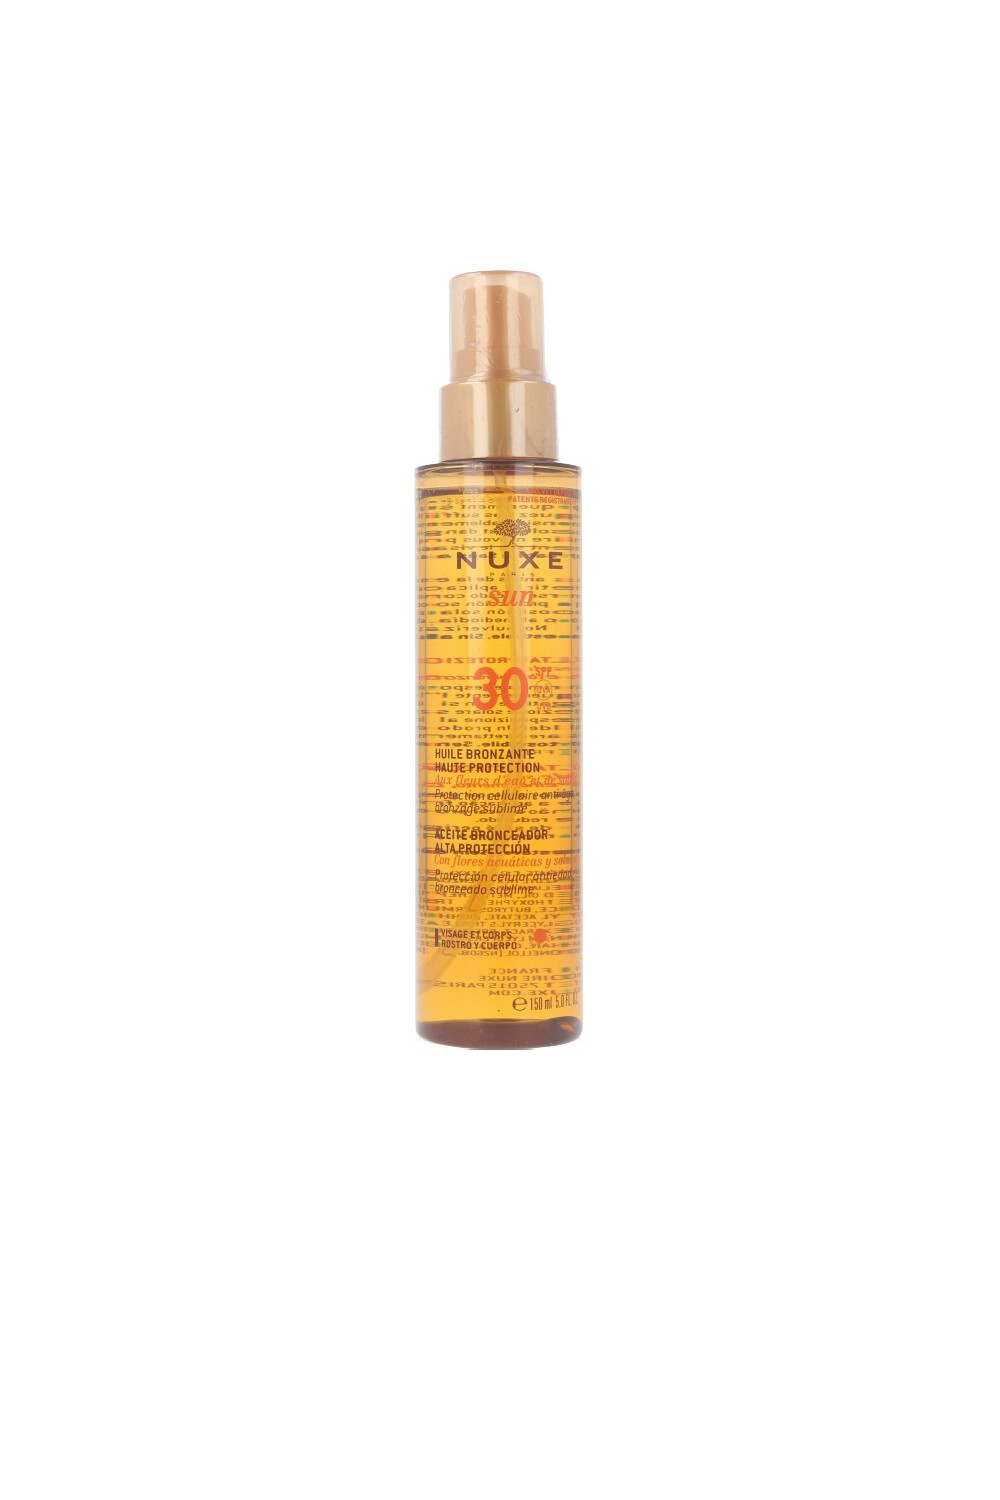 Nuxe Sun Taning Oil Face And Body Spf30 150ml